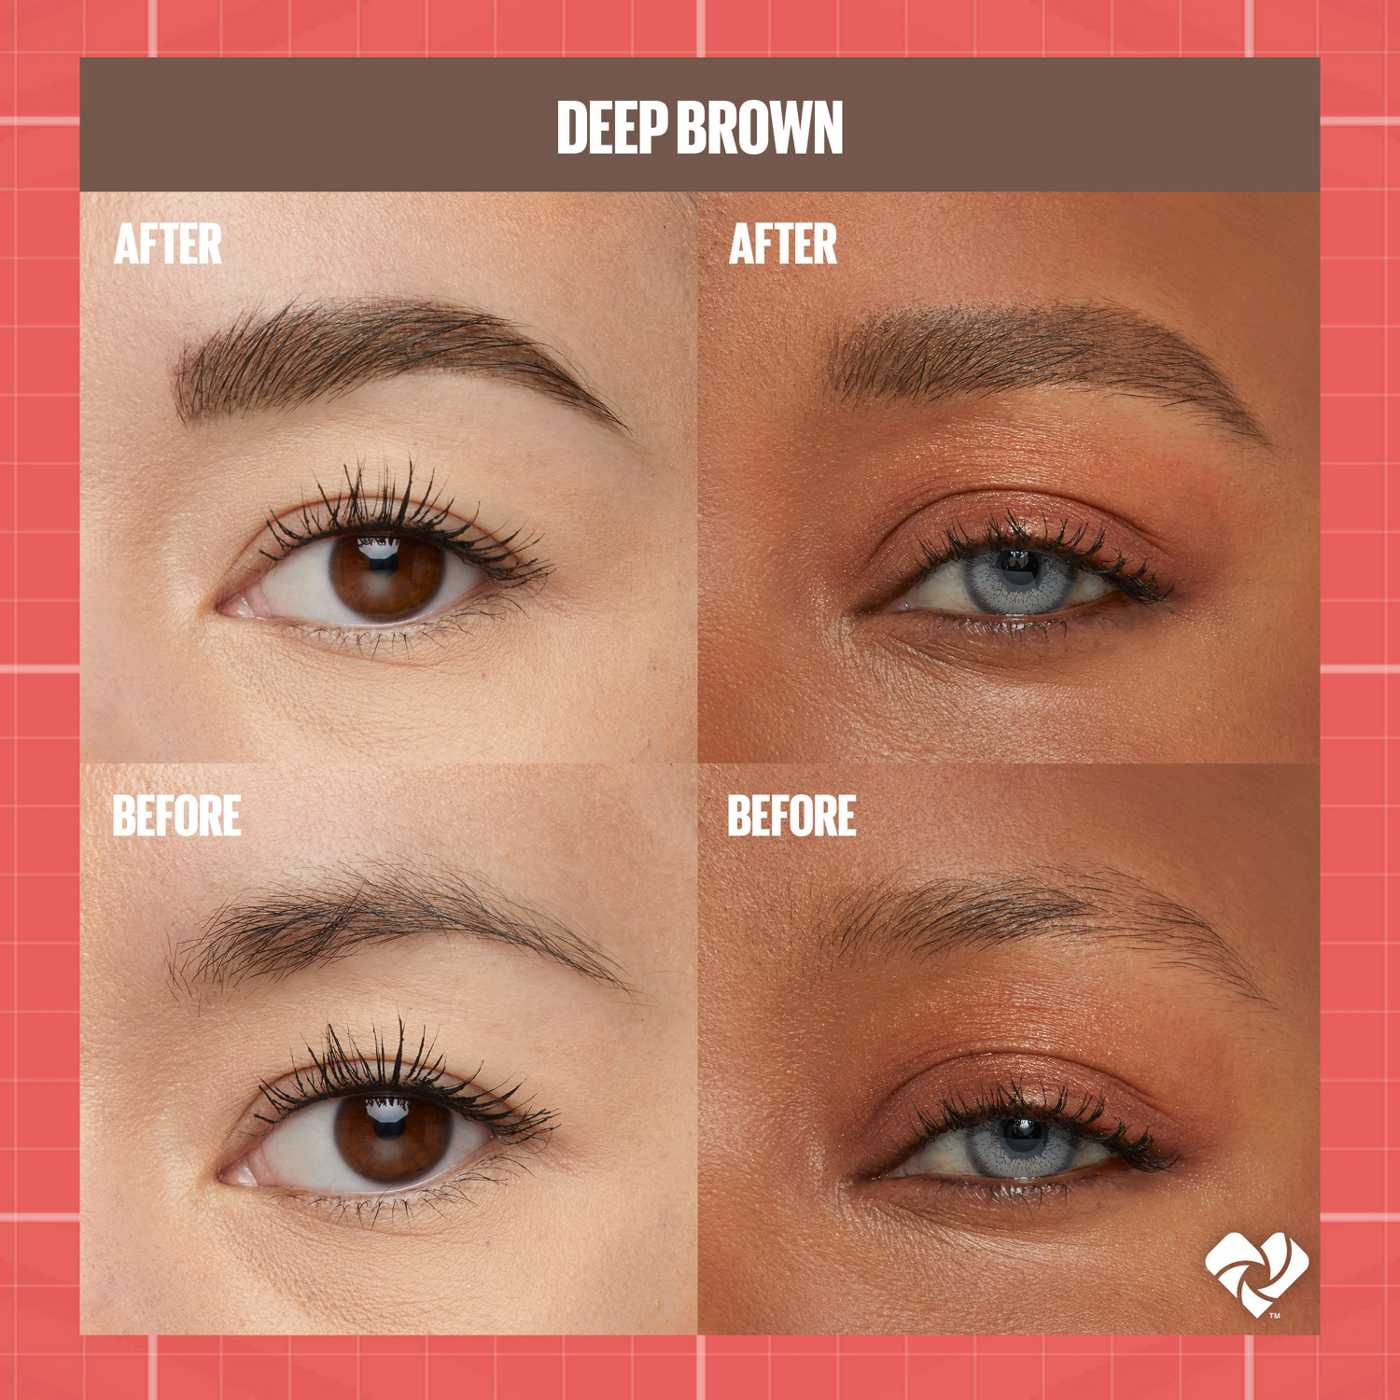 Maybelline Build A Brow 2 In 1 Brow Pen - Deep Brown; image 3 of 17